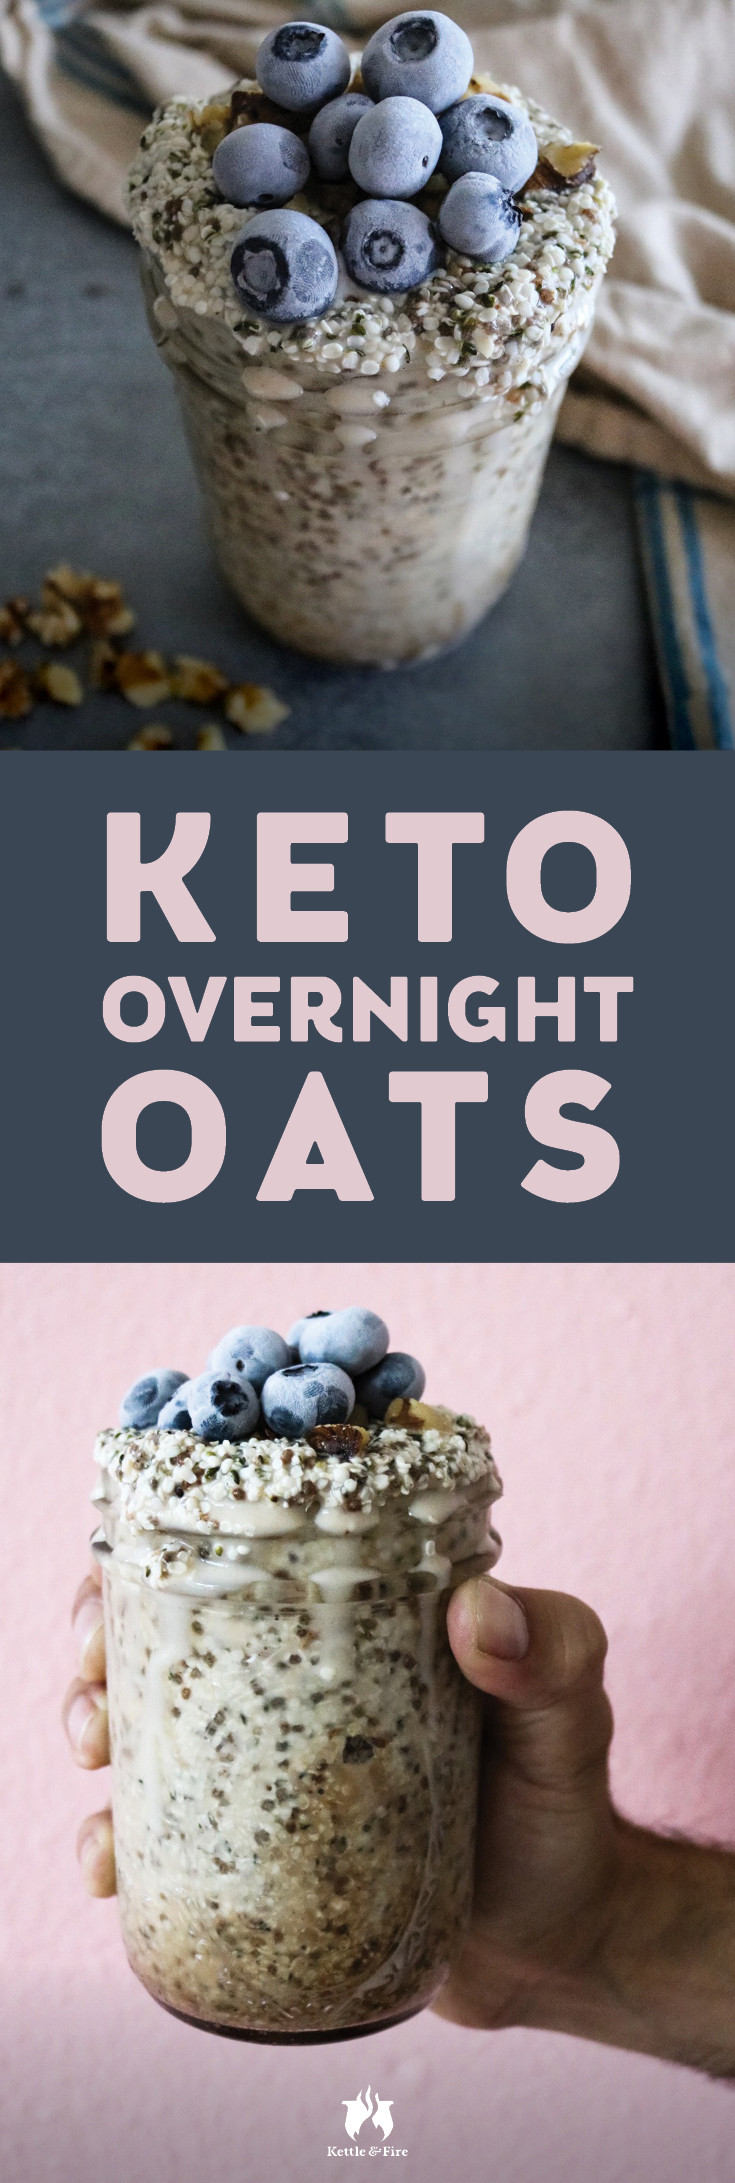 Overnight Oats Healthy Keto
 Keto Overnight "Oats" with Coconut and Blueberries